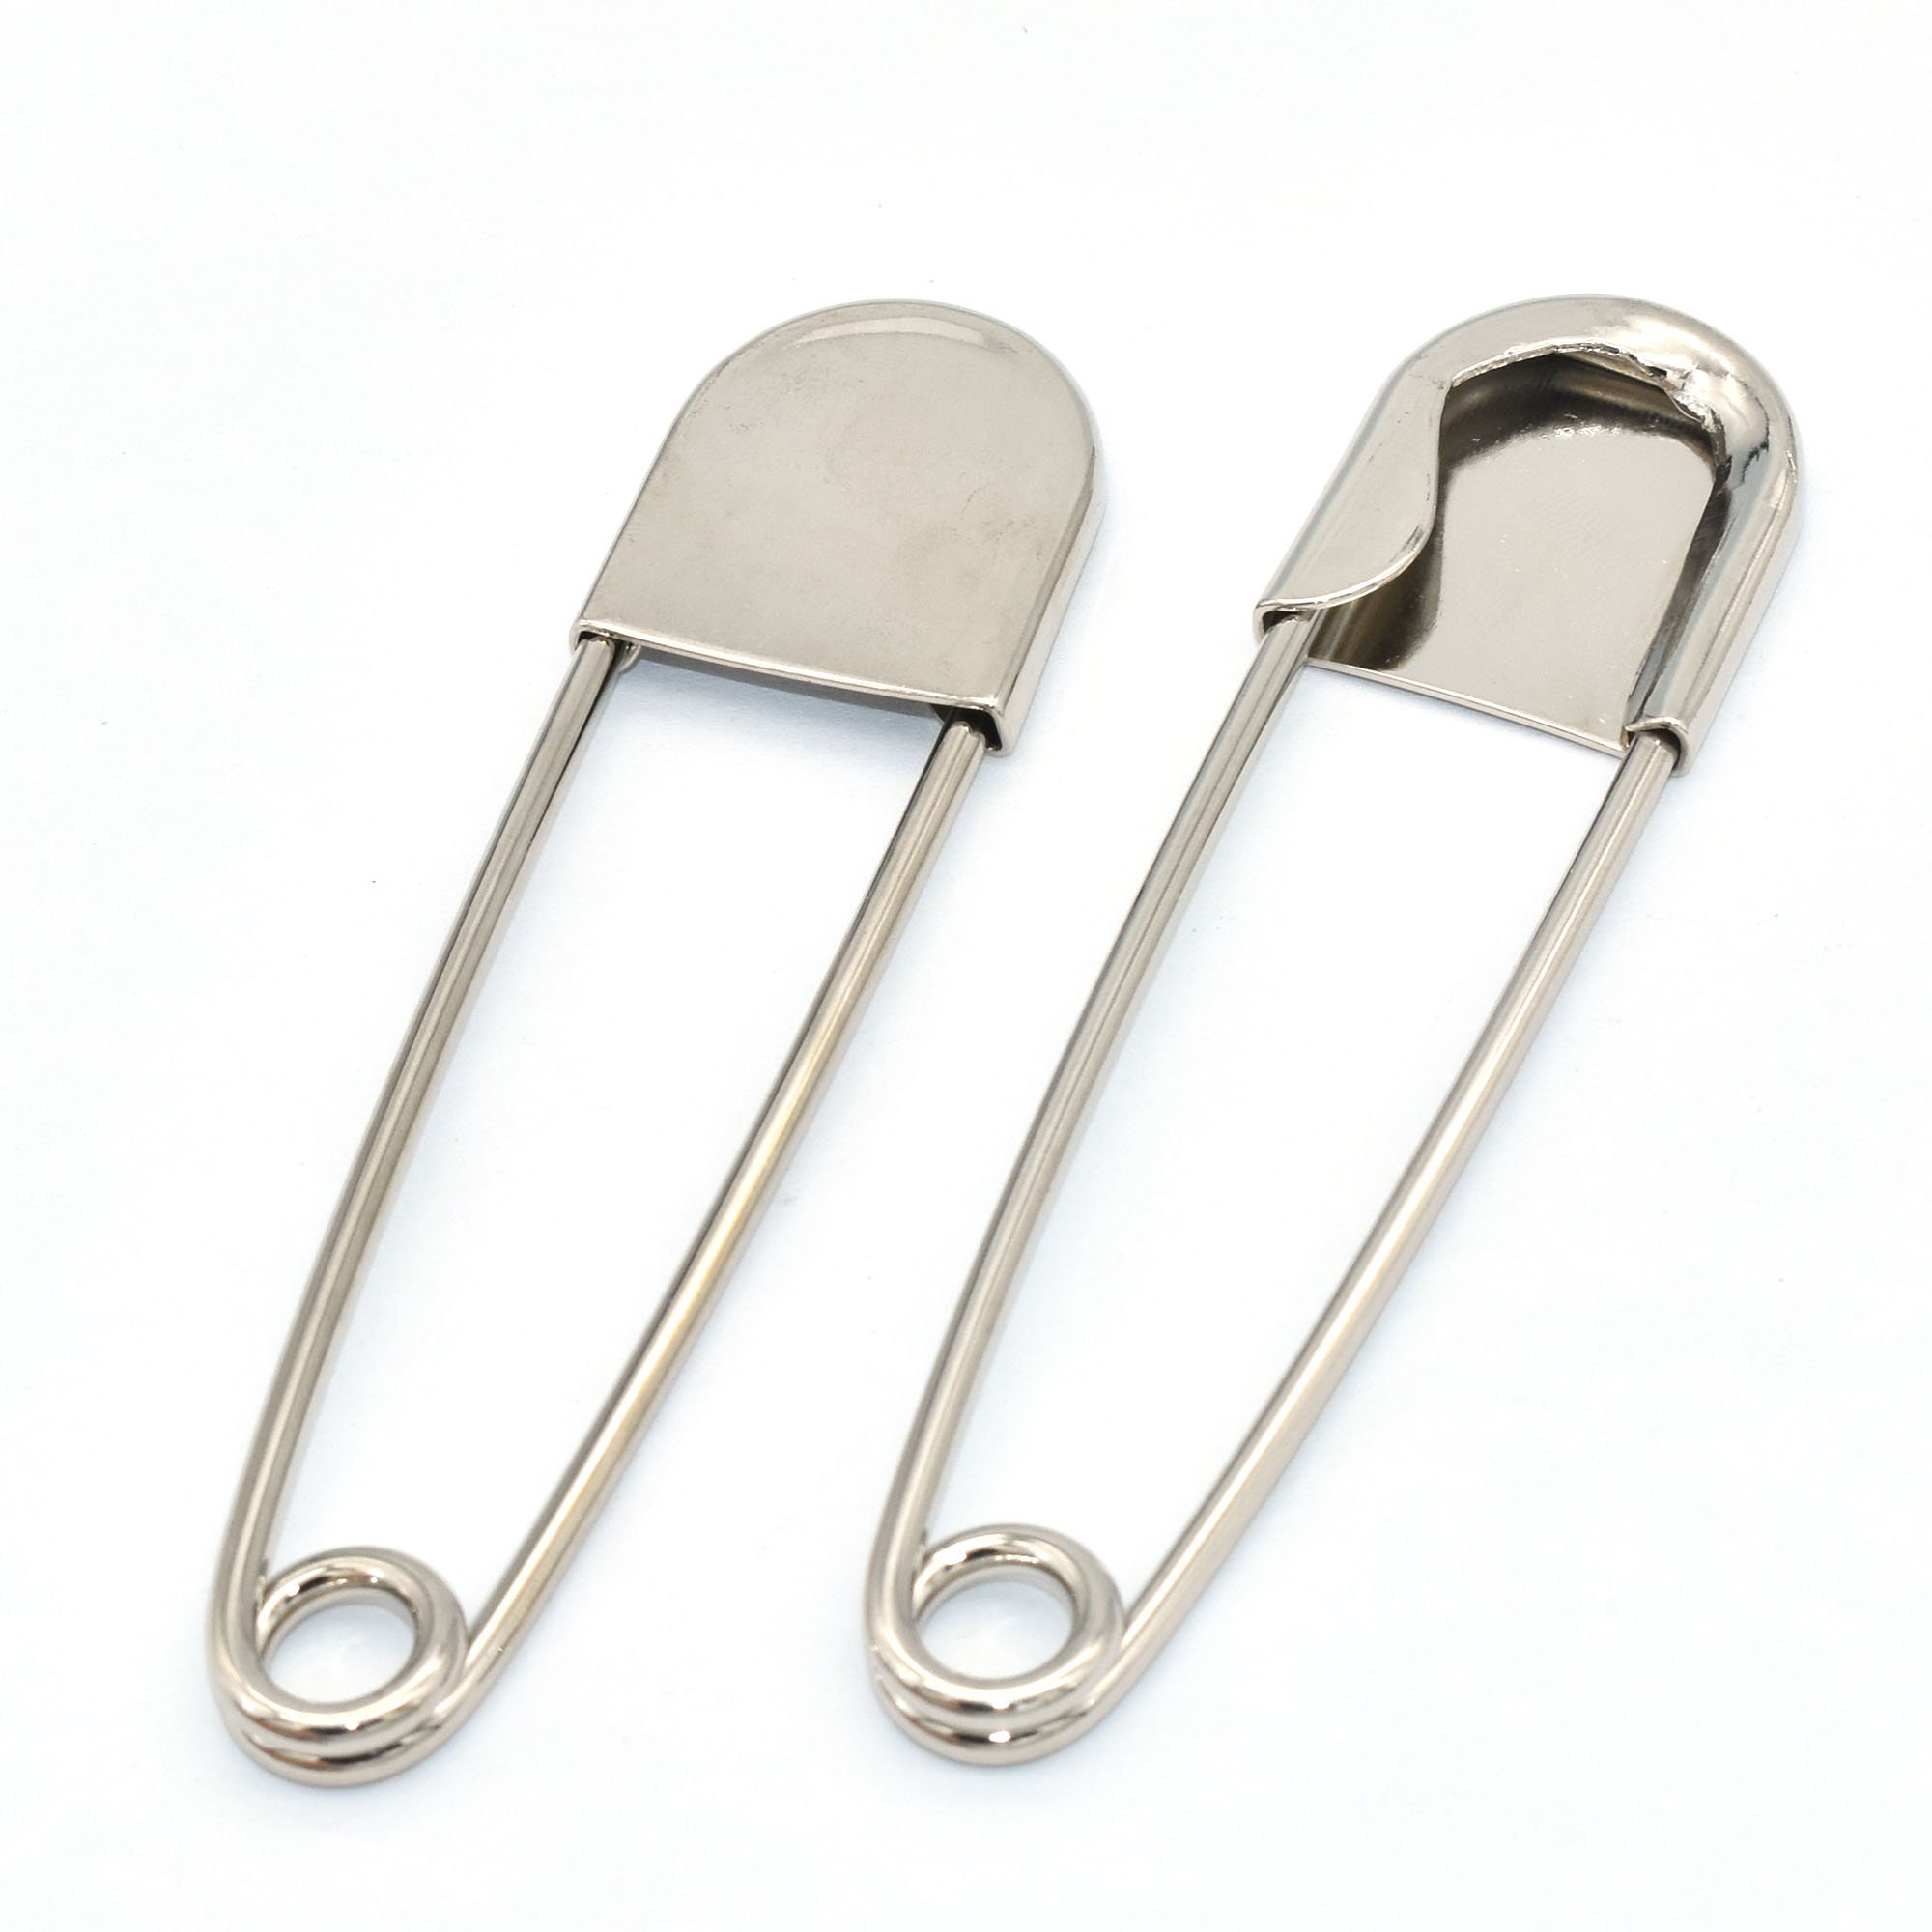 Details about   Two Large 5 Inch New Keychain Stainless Steel Safety Diaper Horse Blanket Pins 